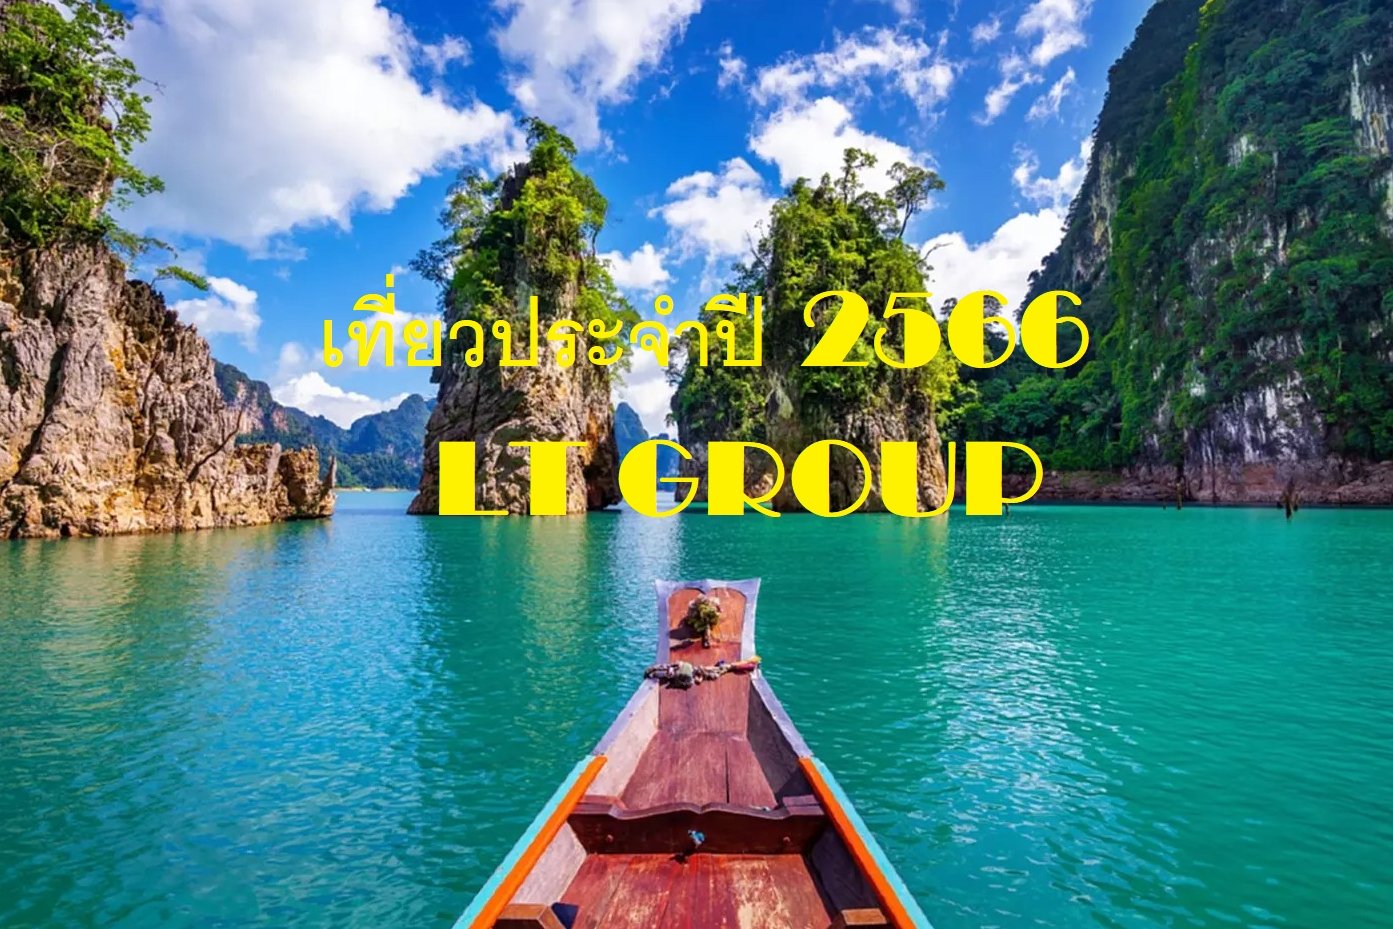 LT GROUP Annual travel in 2023